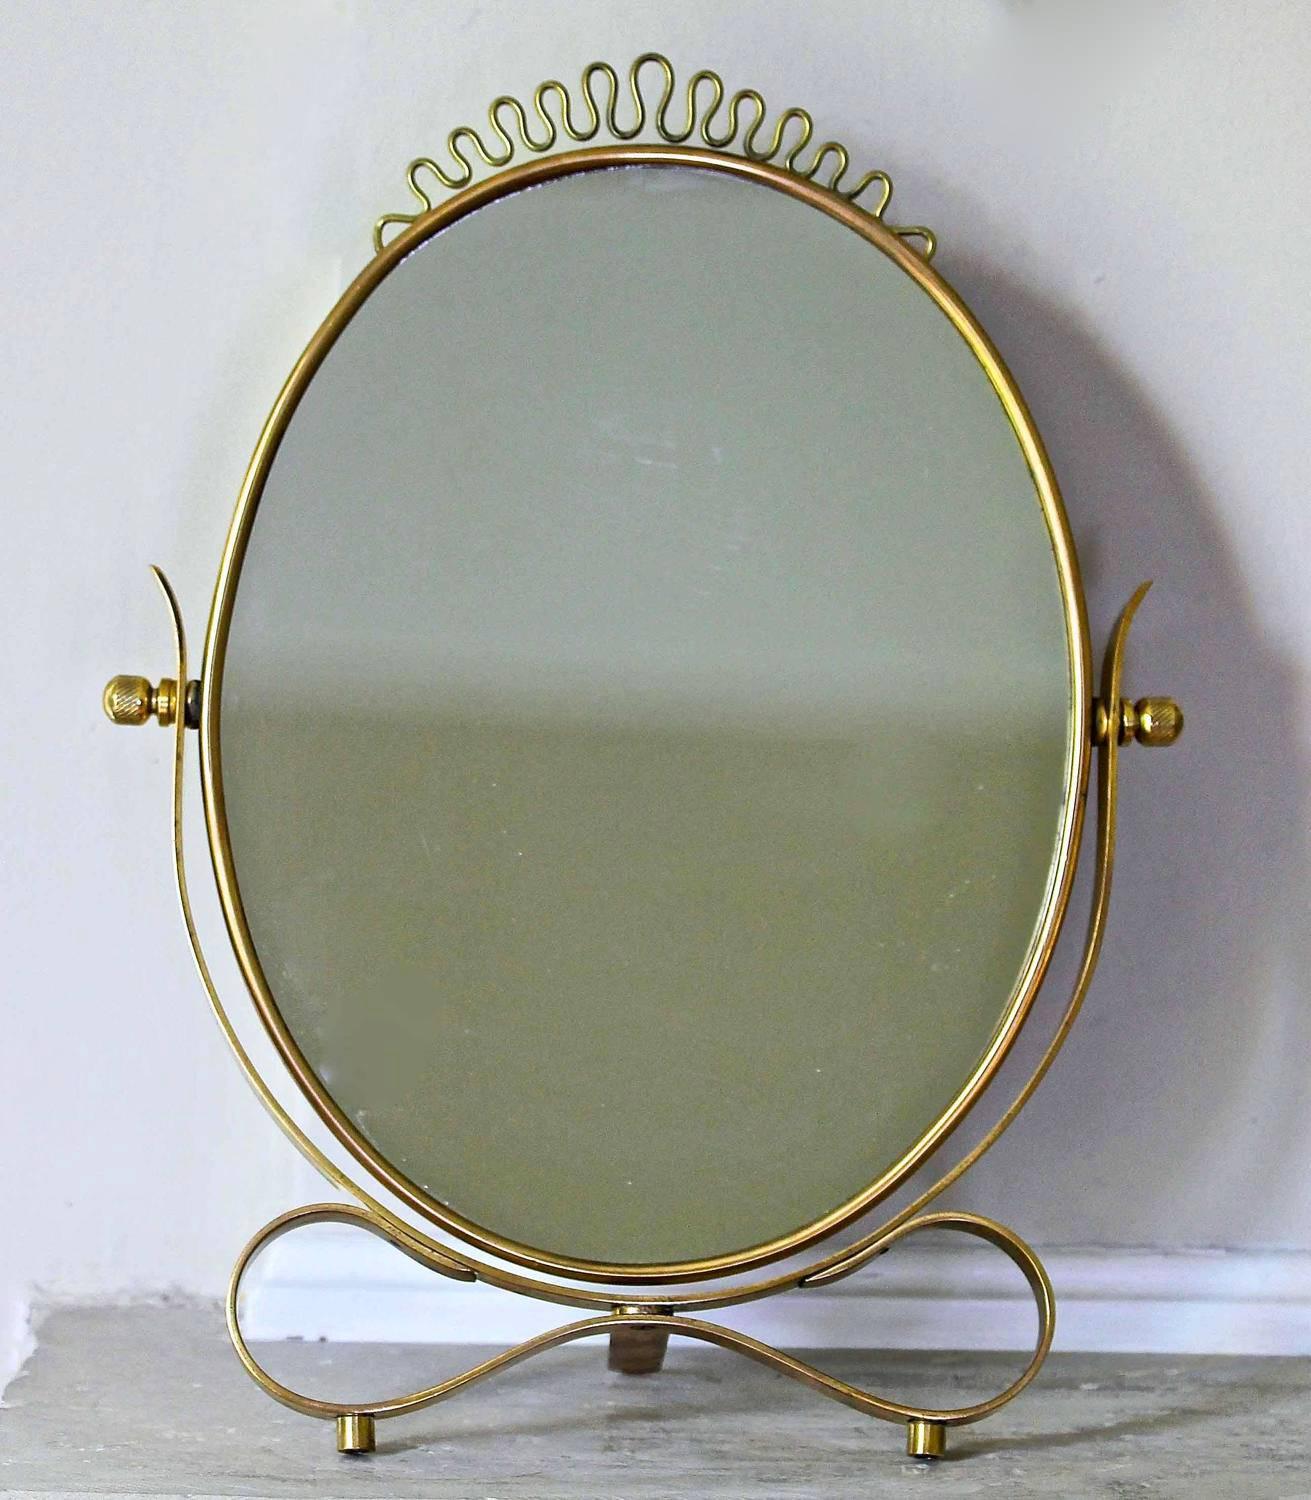 Very attractive Italian brass vanity table mirror, in the style of Gio Ponti. Solid brass construction with wood backing.